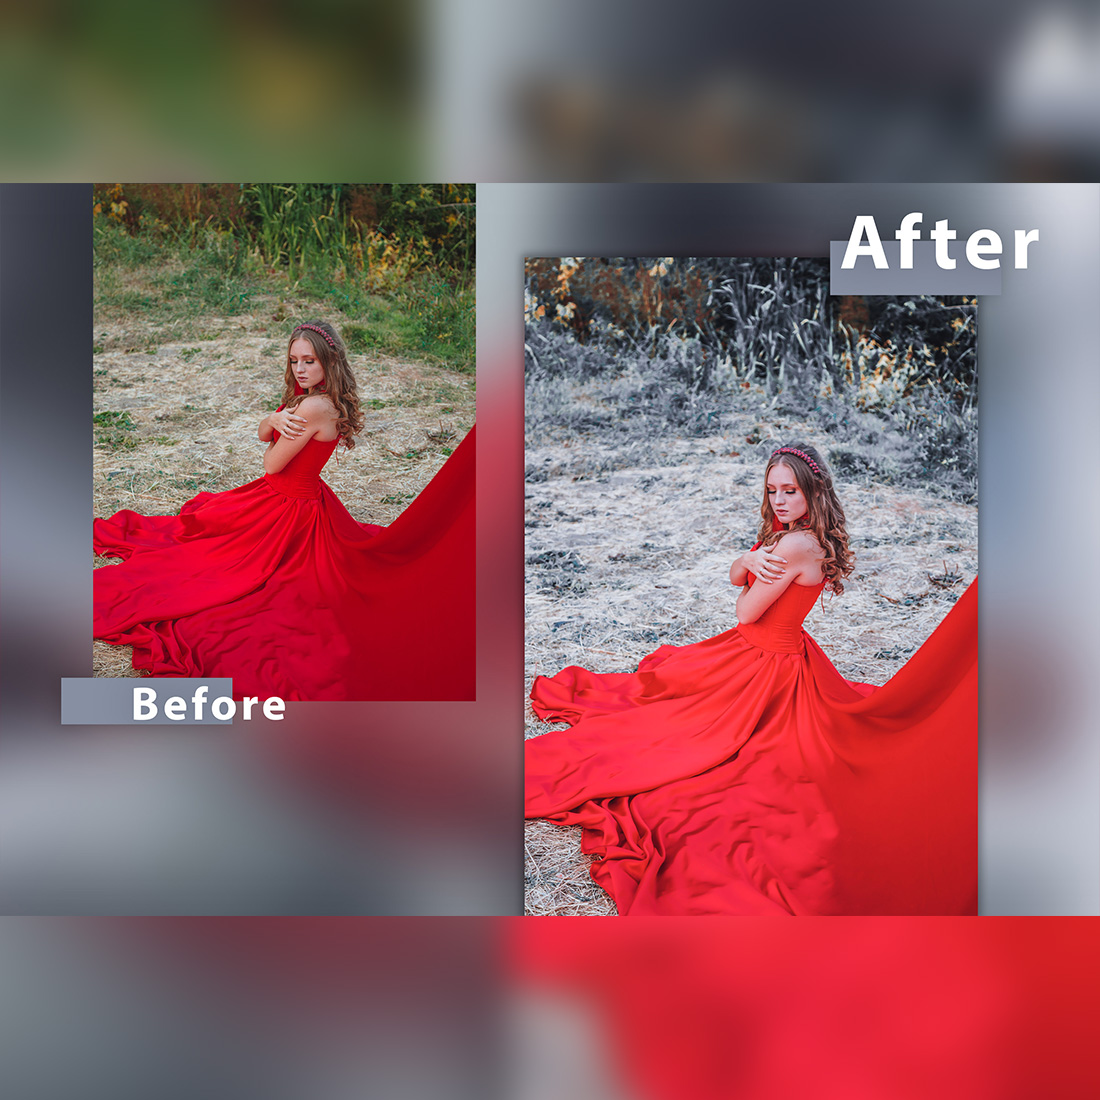 12 Photoshop Actions, Spring Rose Ps Action, Green Blue ACR Preset, Saturation Filter, Lifestyle Theme For Instagram, Professional Portrait preview image.